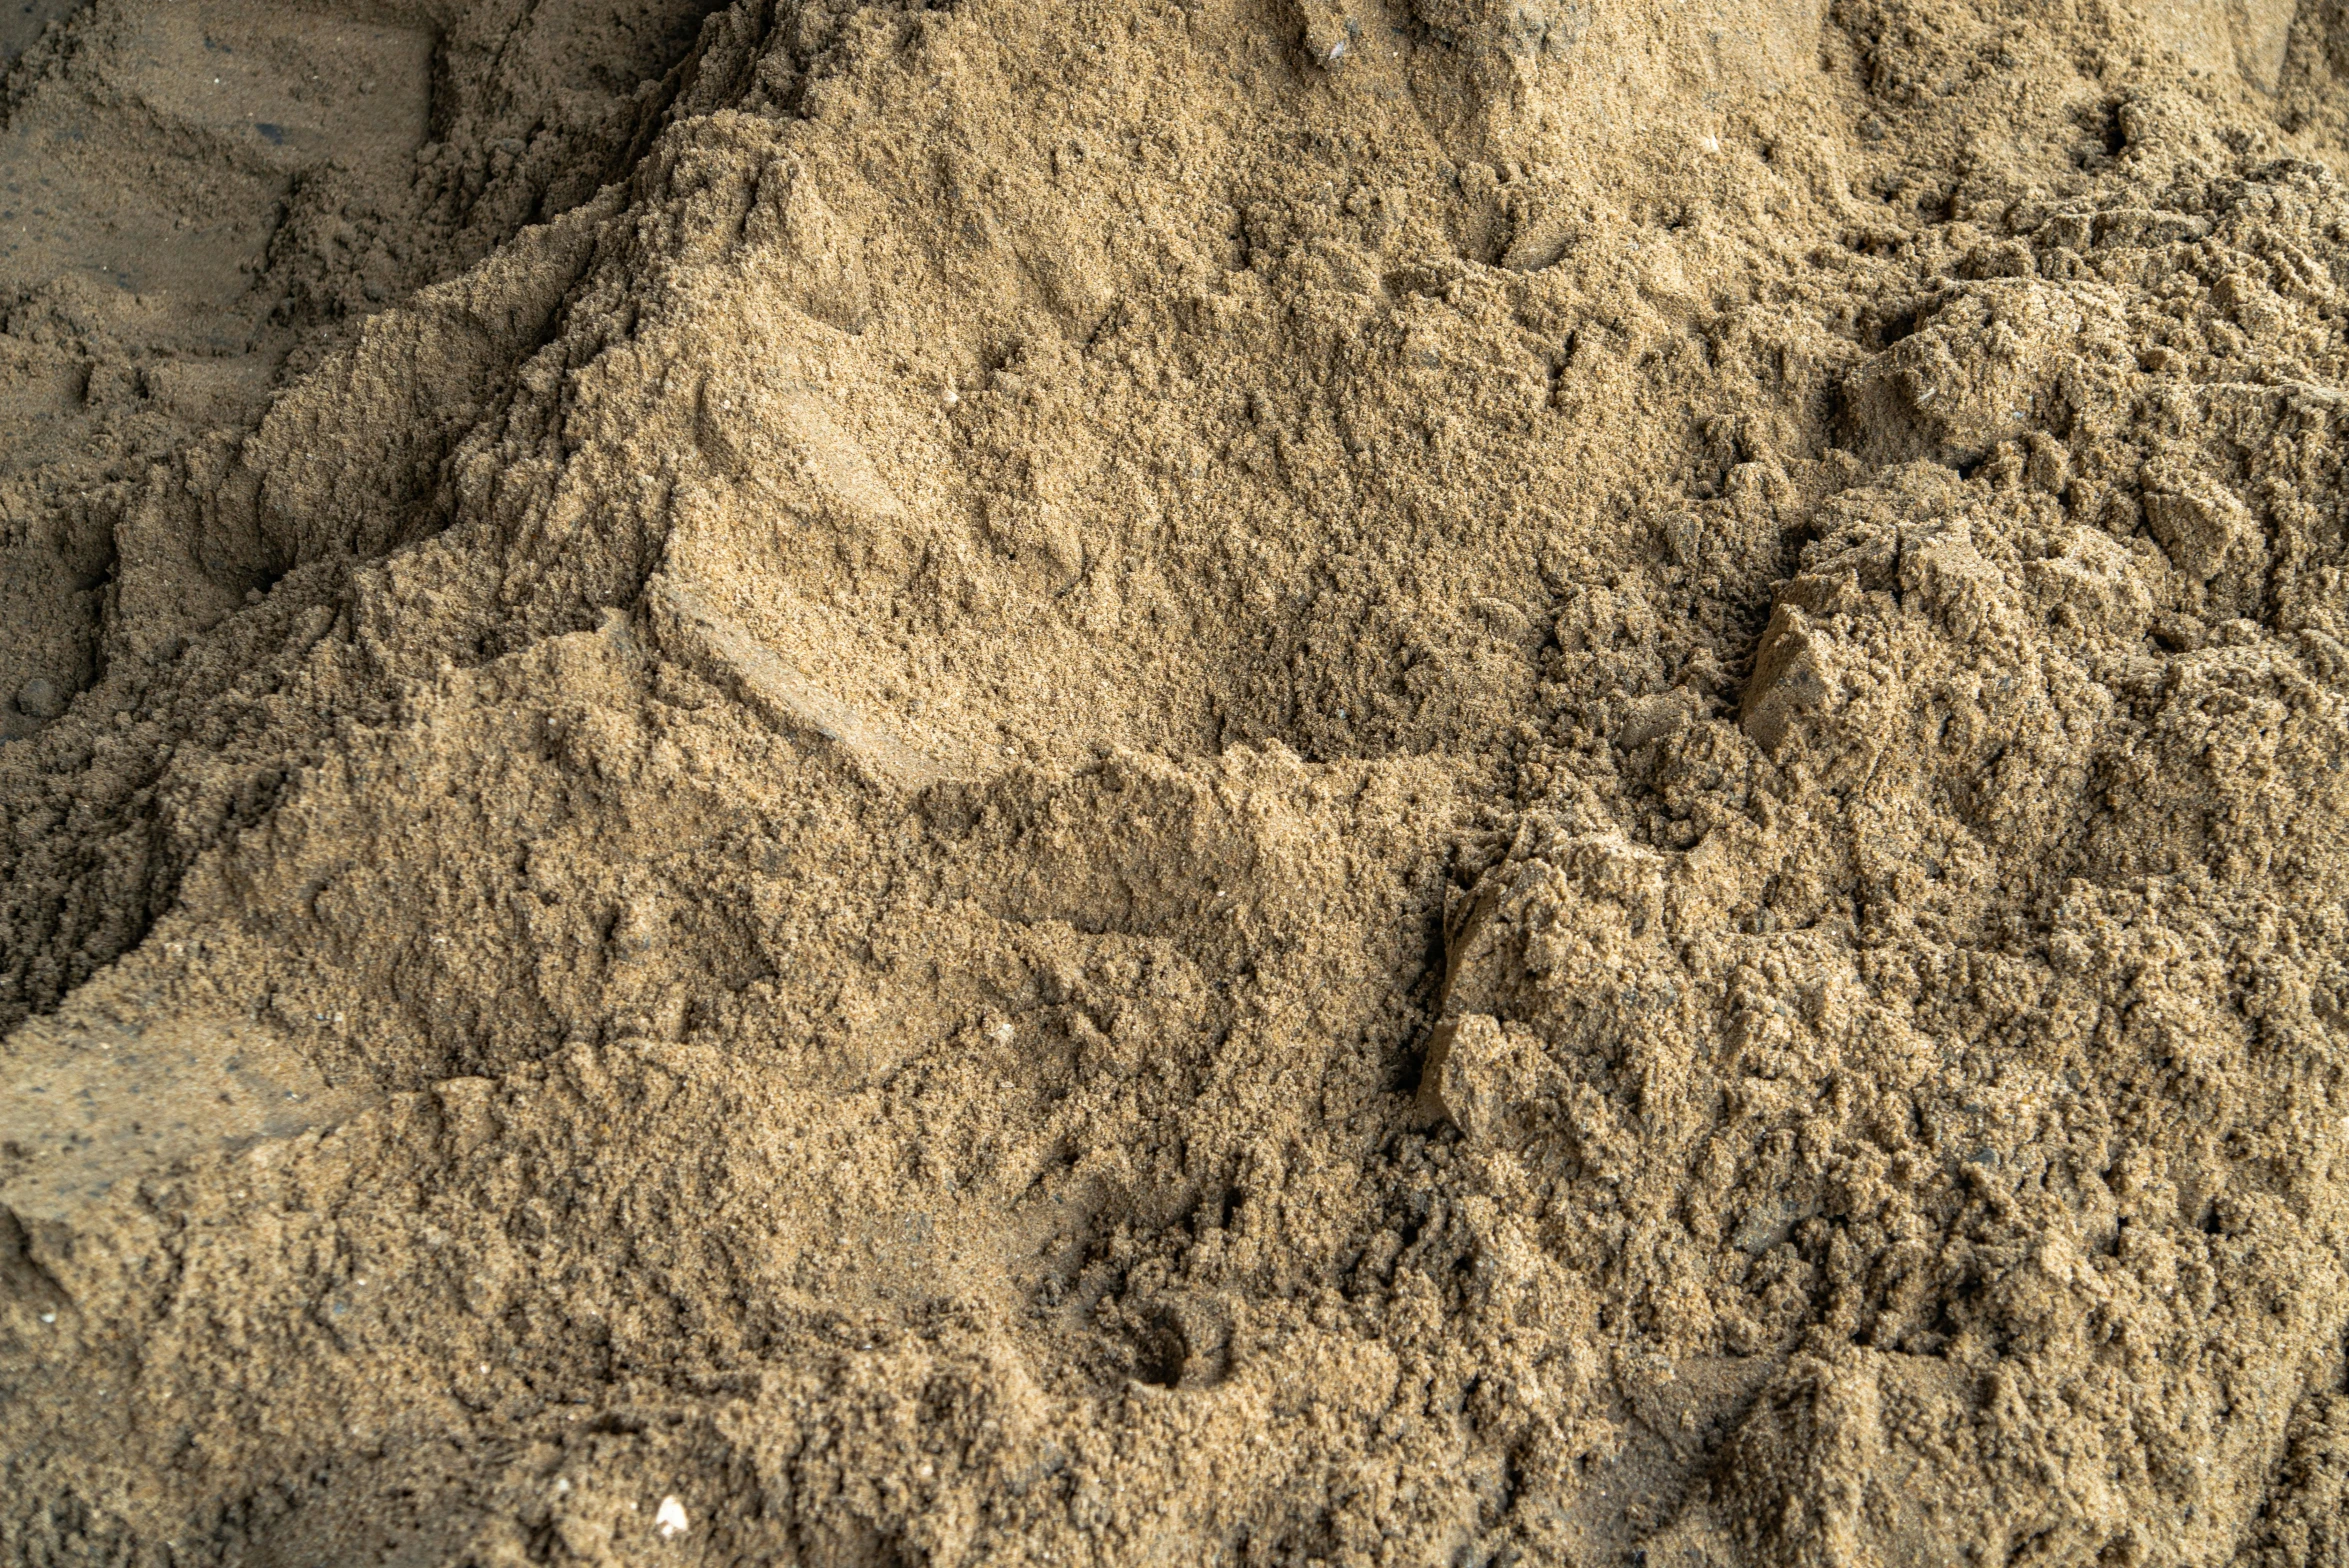 the soil is made from dirt and dirt